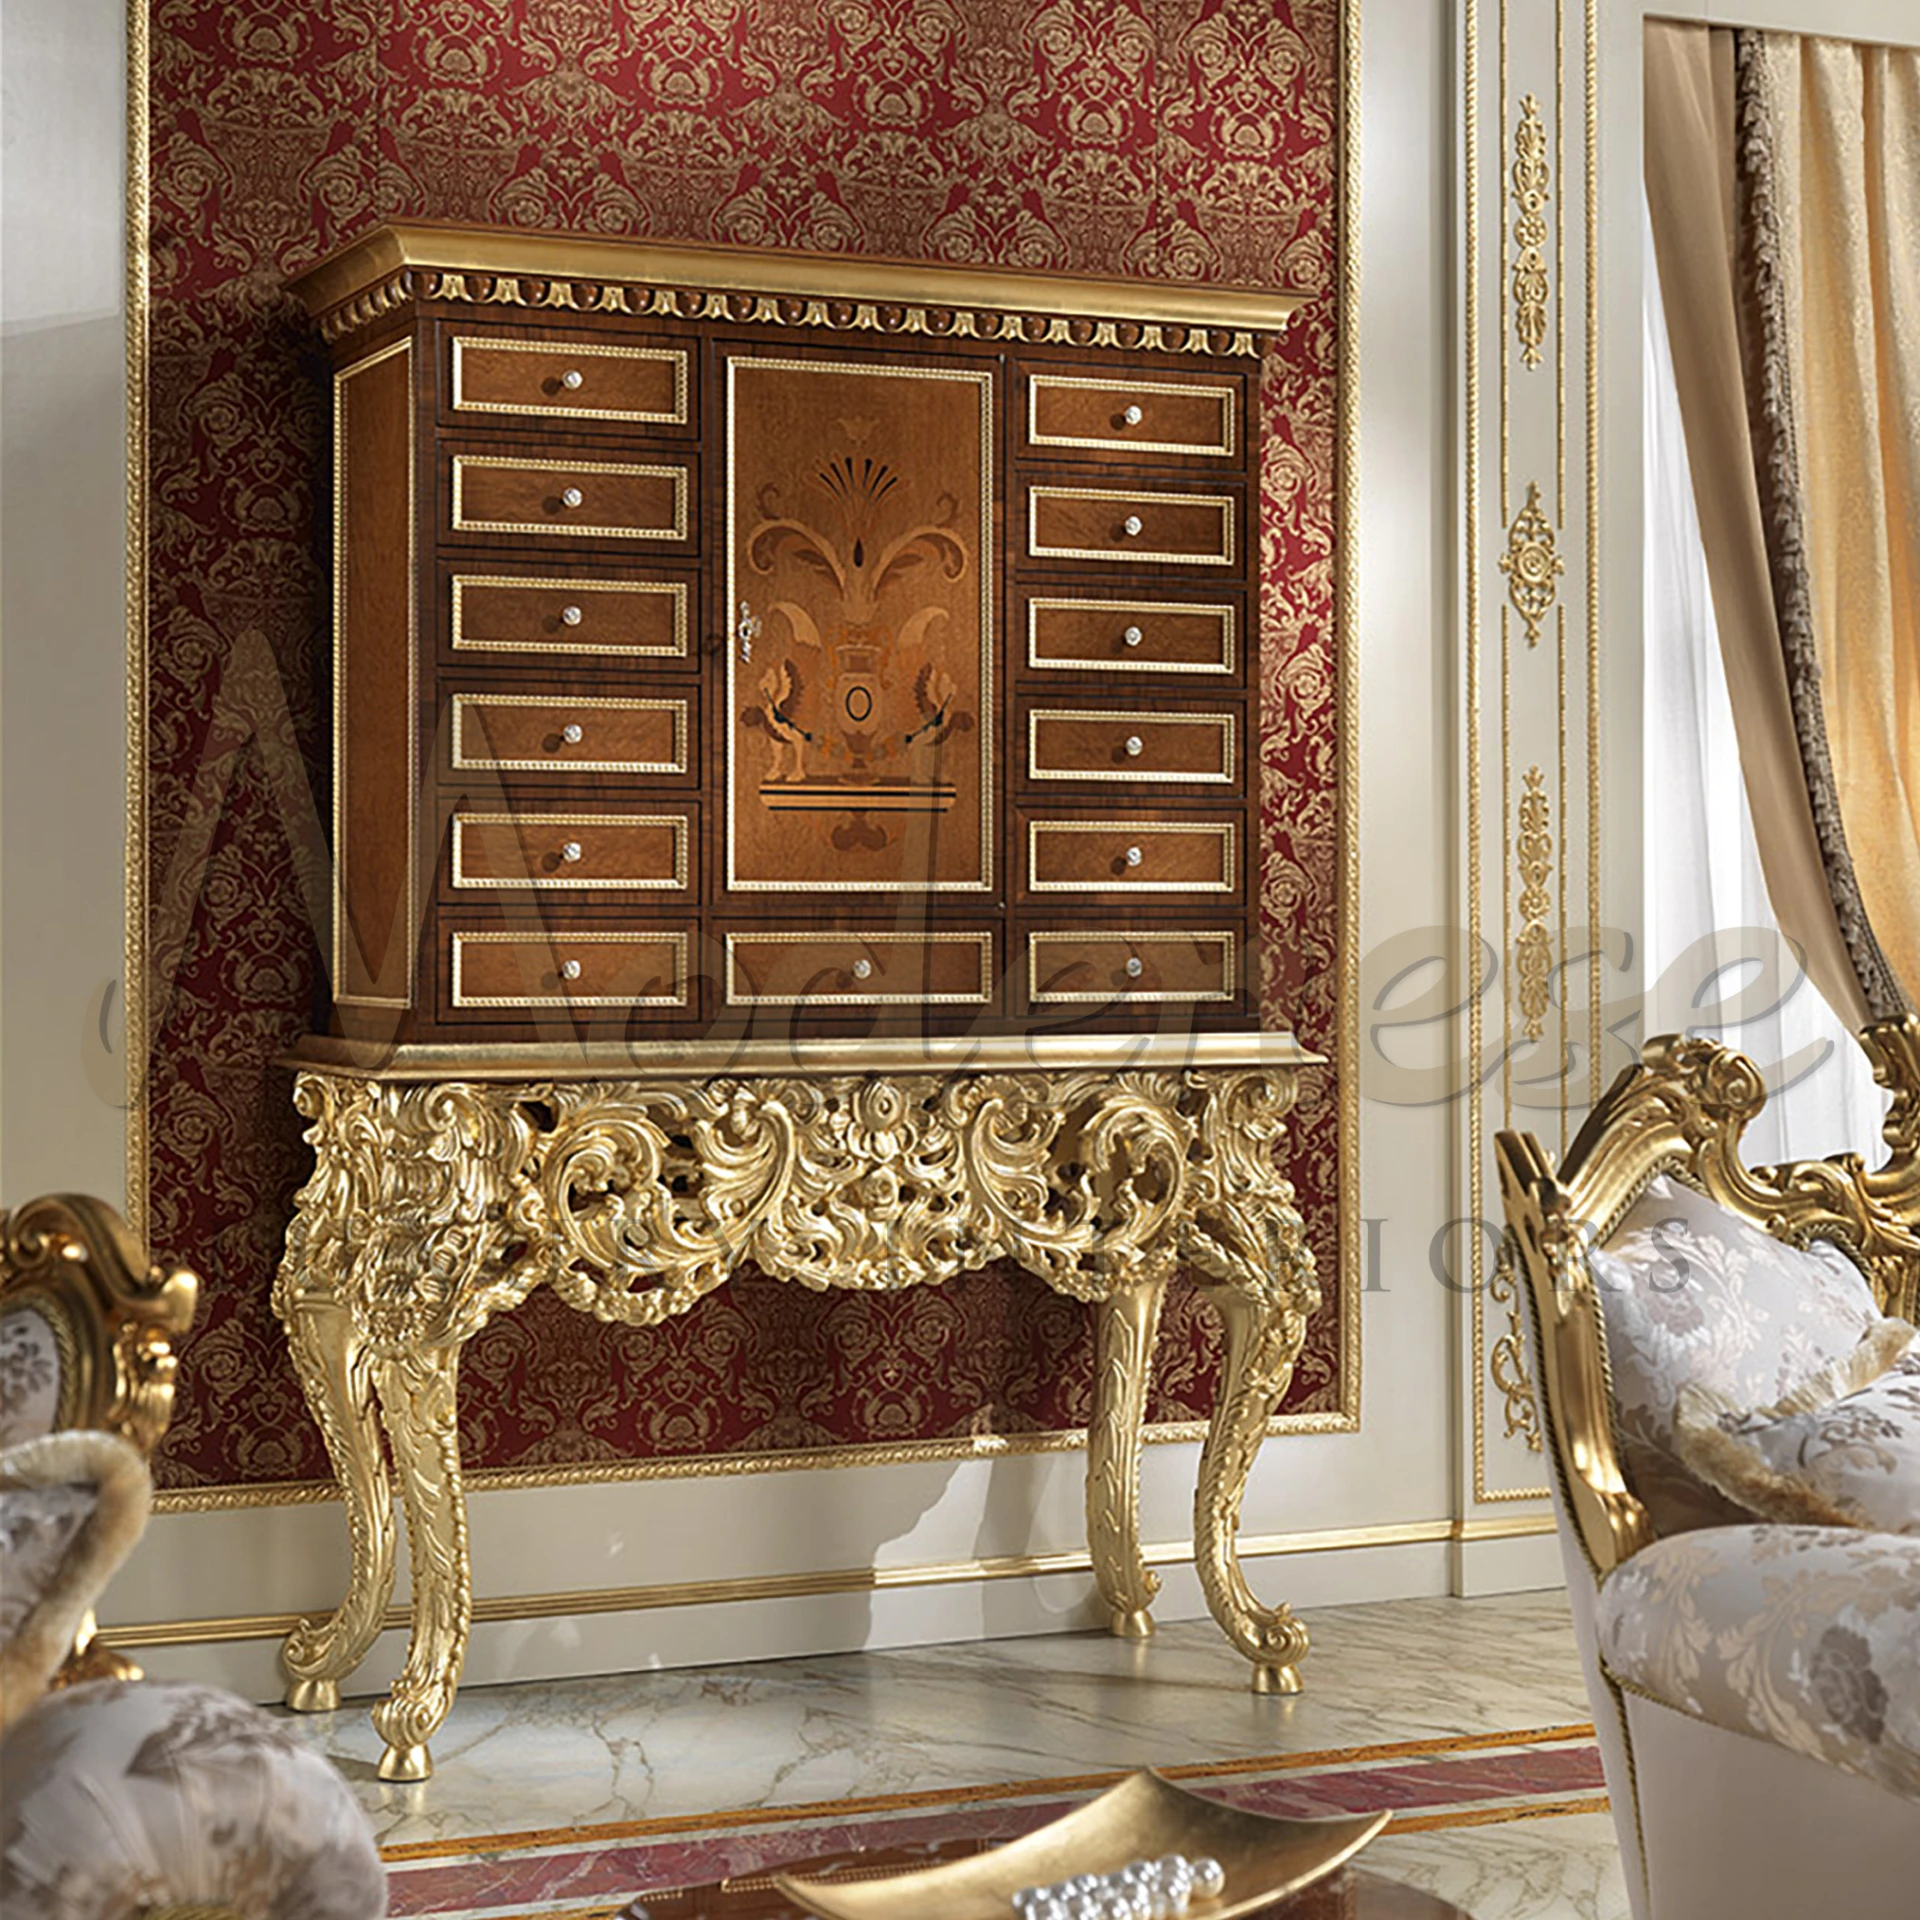 This magnificent 13-drawer cabinet from Modenese Furniture boasts hand-carved details, shiny gold leaf applications, and inlaid drawers, all enveloped in a luxurious walnut finish.